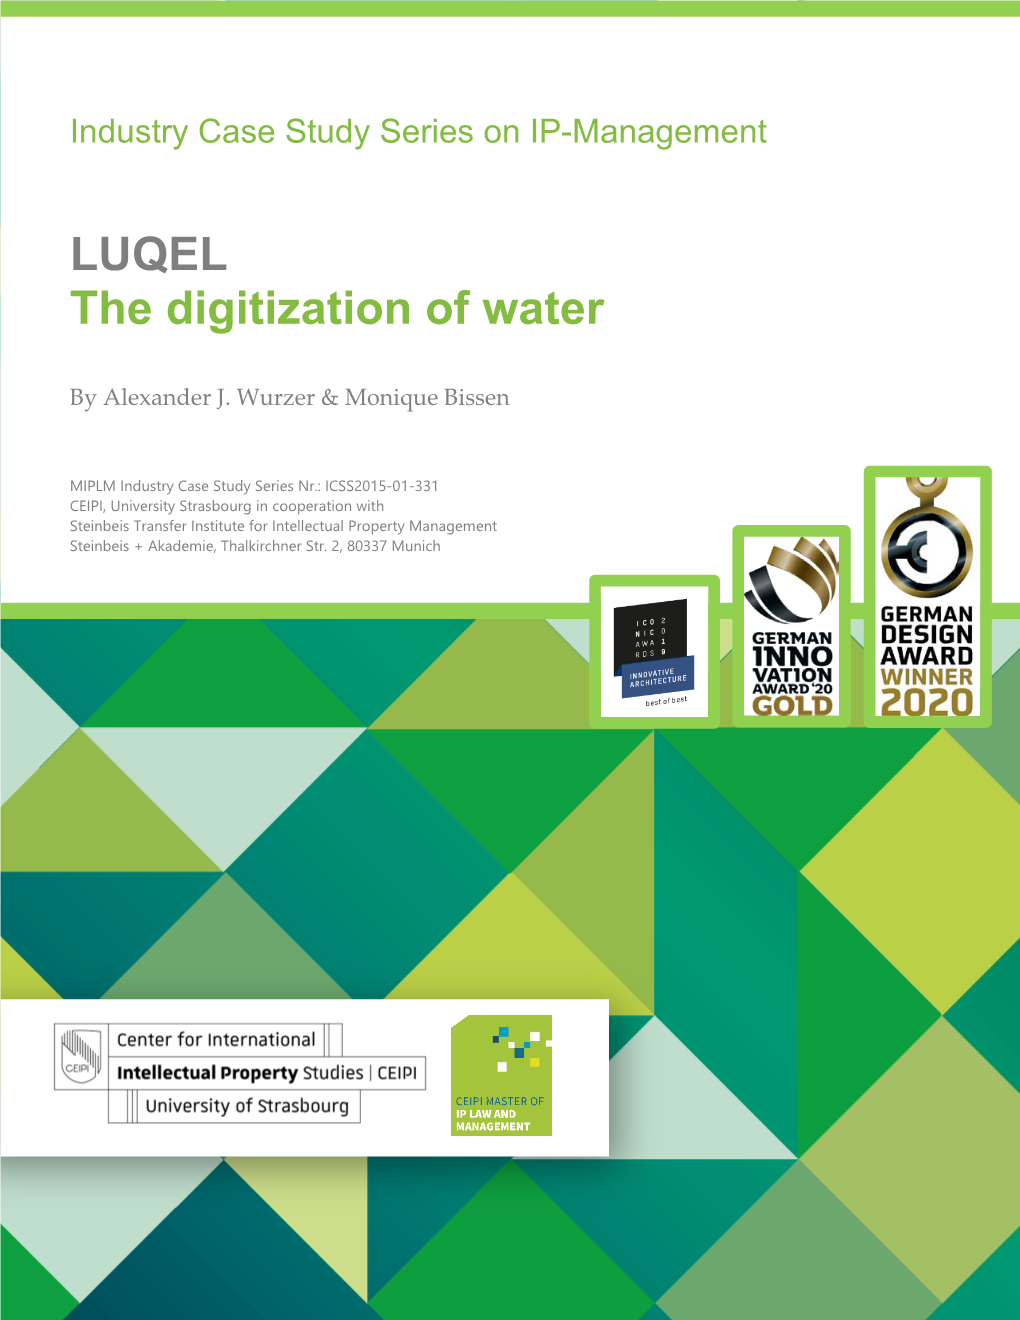 LUQEL the Digitization of Water